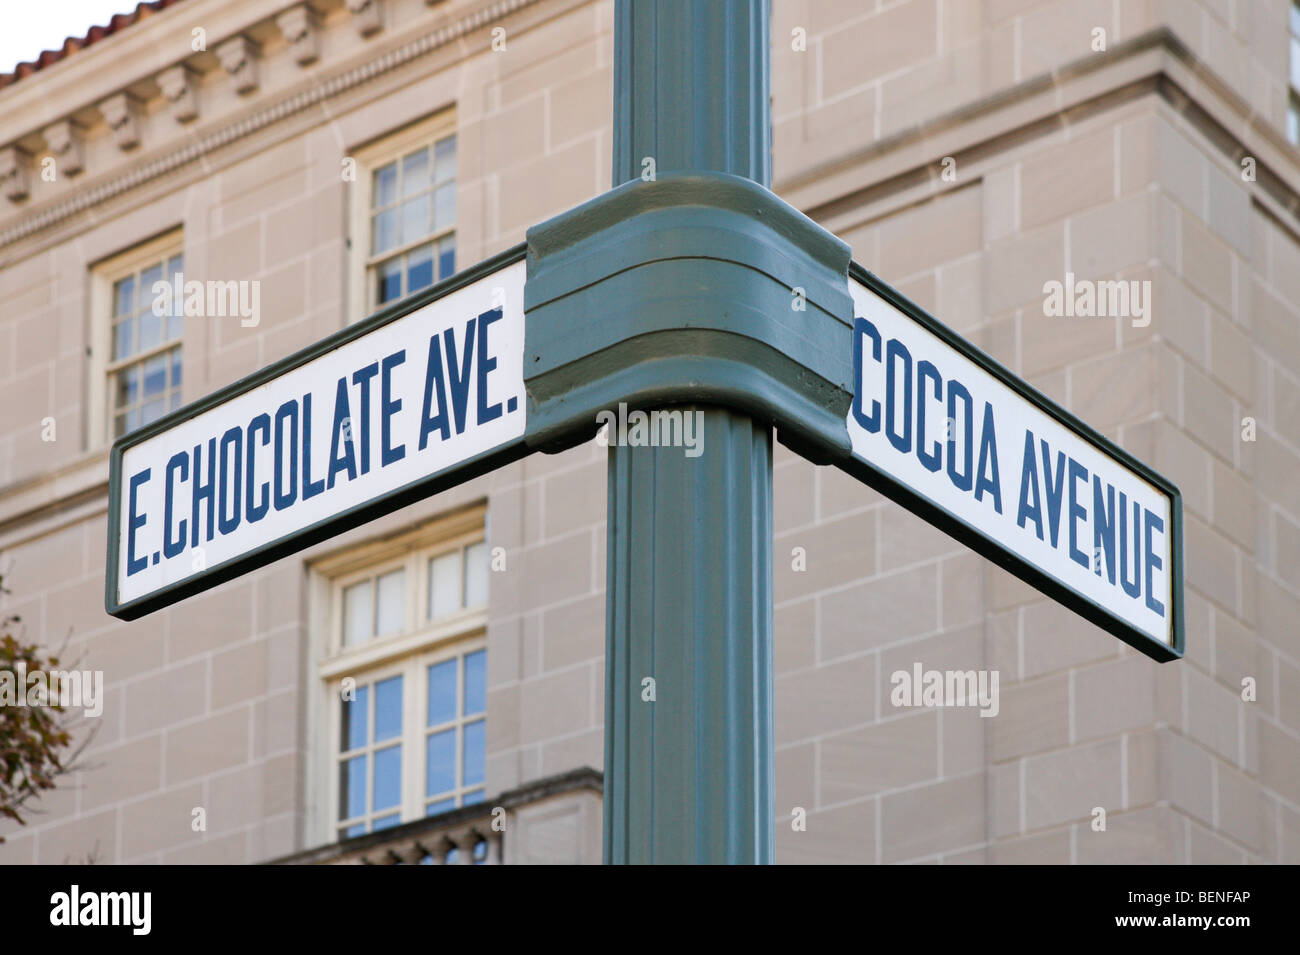 Street sign at the intersection of Chocolate Avenue and Cocoa Avenue, Hershey, Pennsylvania, USA Stock Photo